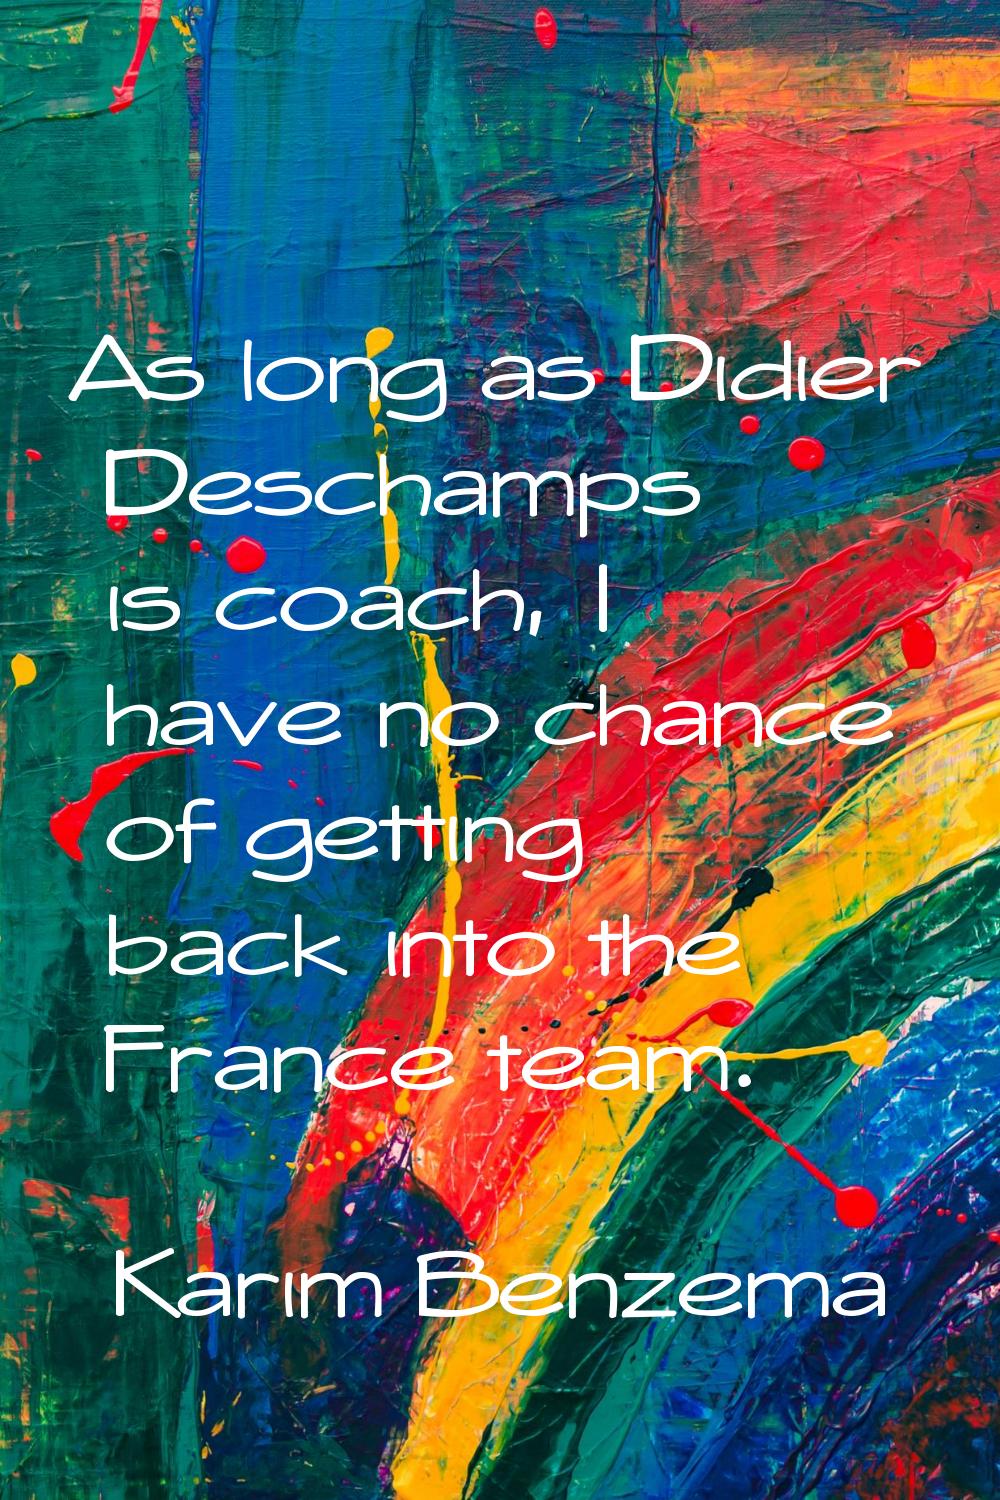 As long as Didier Deschamps is coach, I have no chance of getting back into the France team.